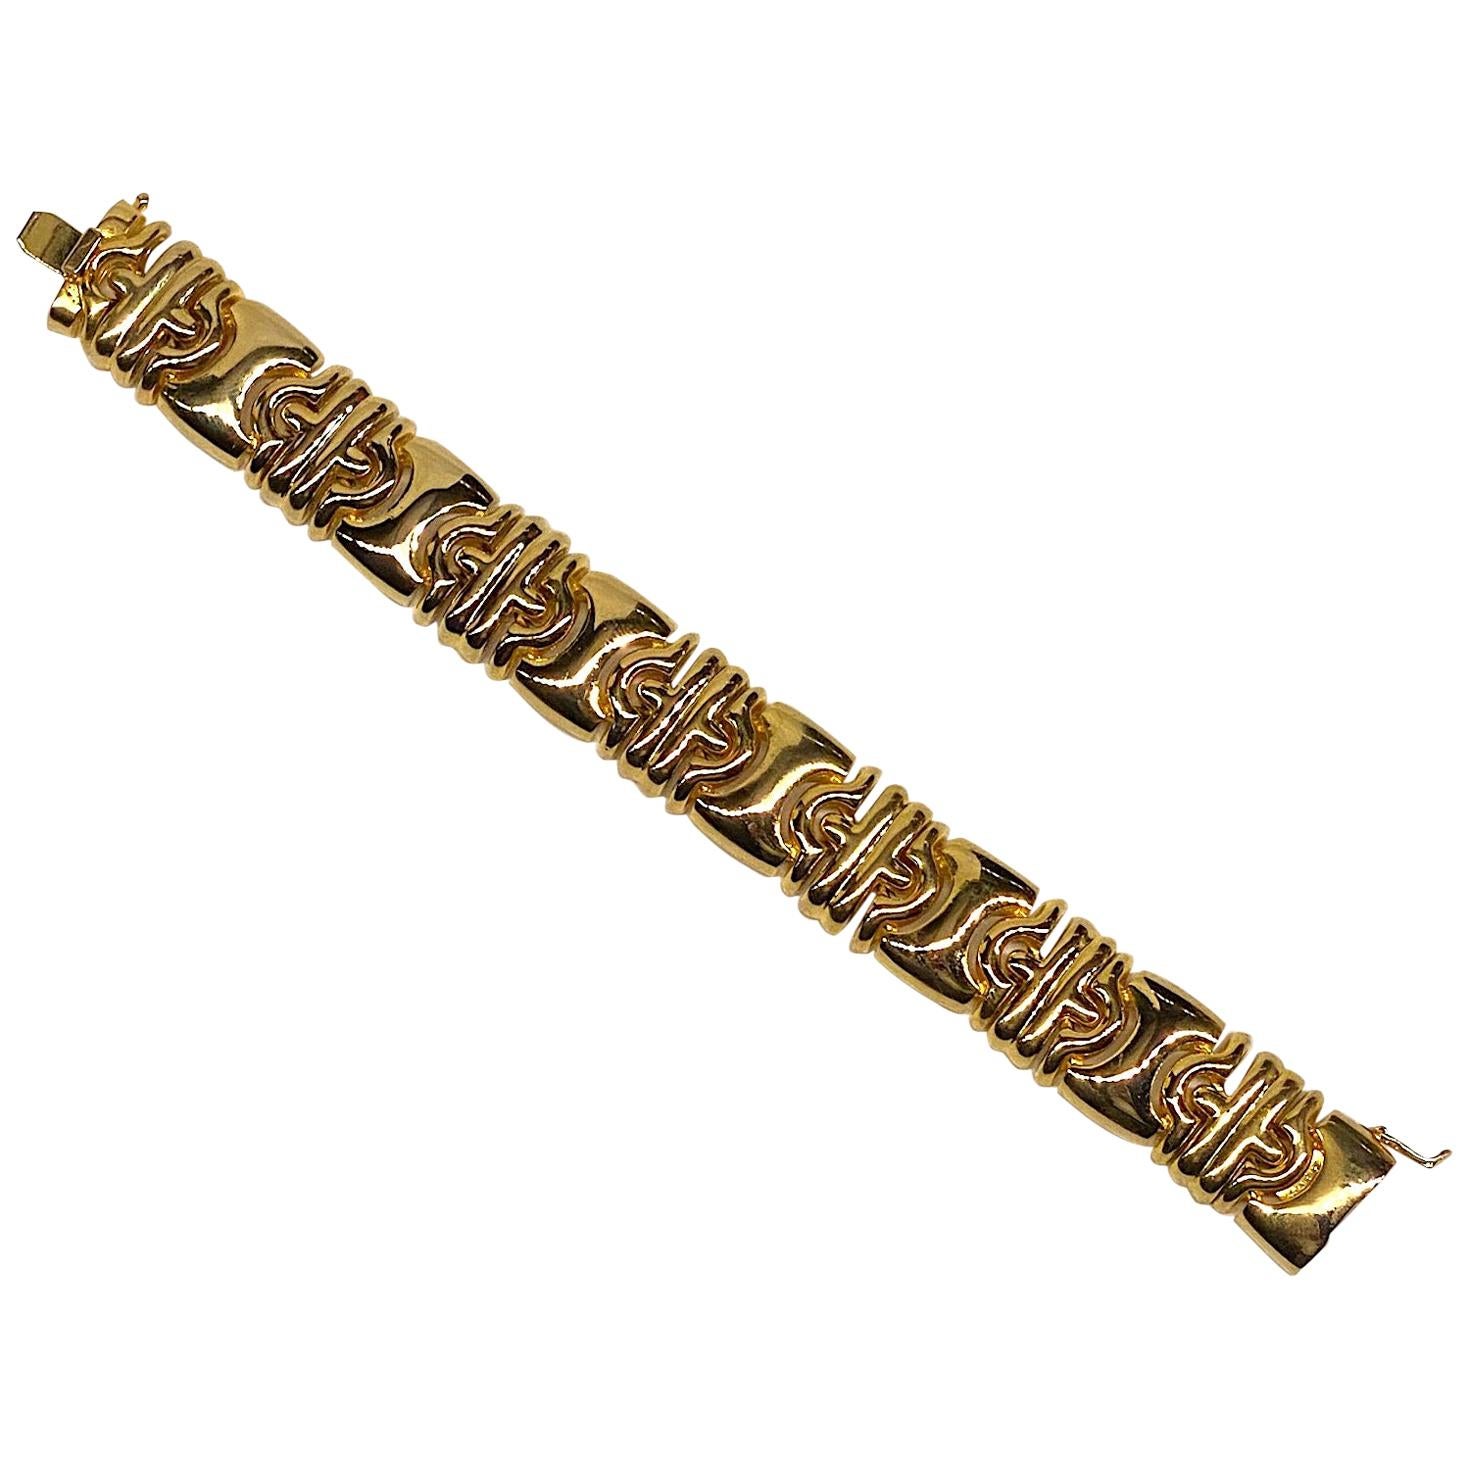 A lovely tailored Parentesi style link bracelet from the 1980s by American fashion jewelry company Panetta. The bracelet measures .75 of an inch wide and 7.75 inches long with a wearable length of 7.5 inches. Shiny gold plate top and a textures gold